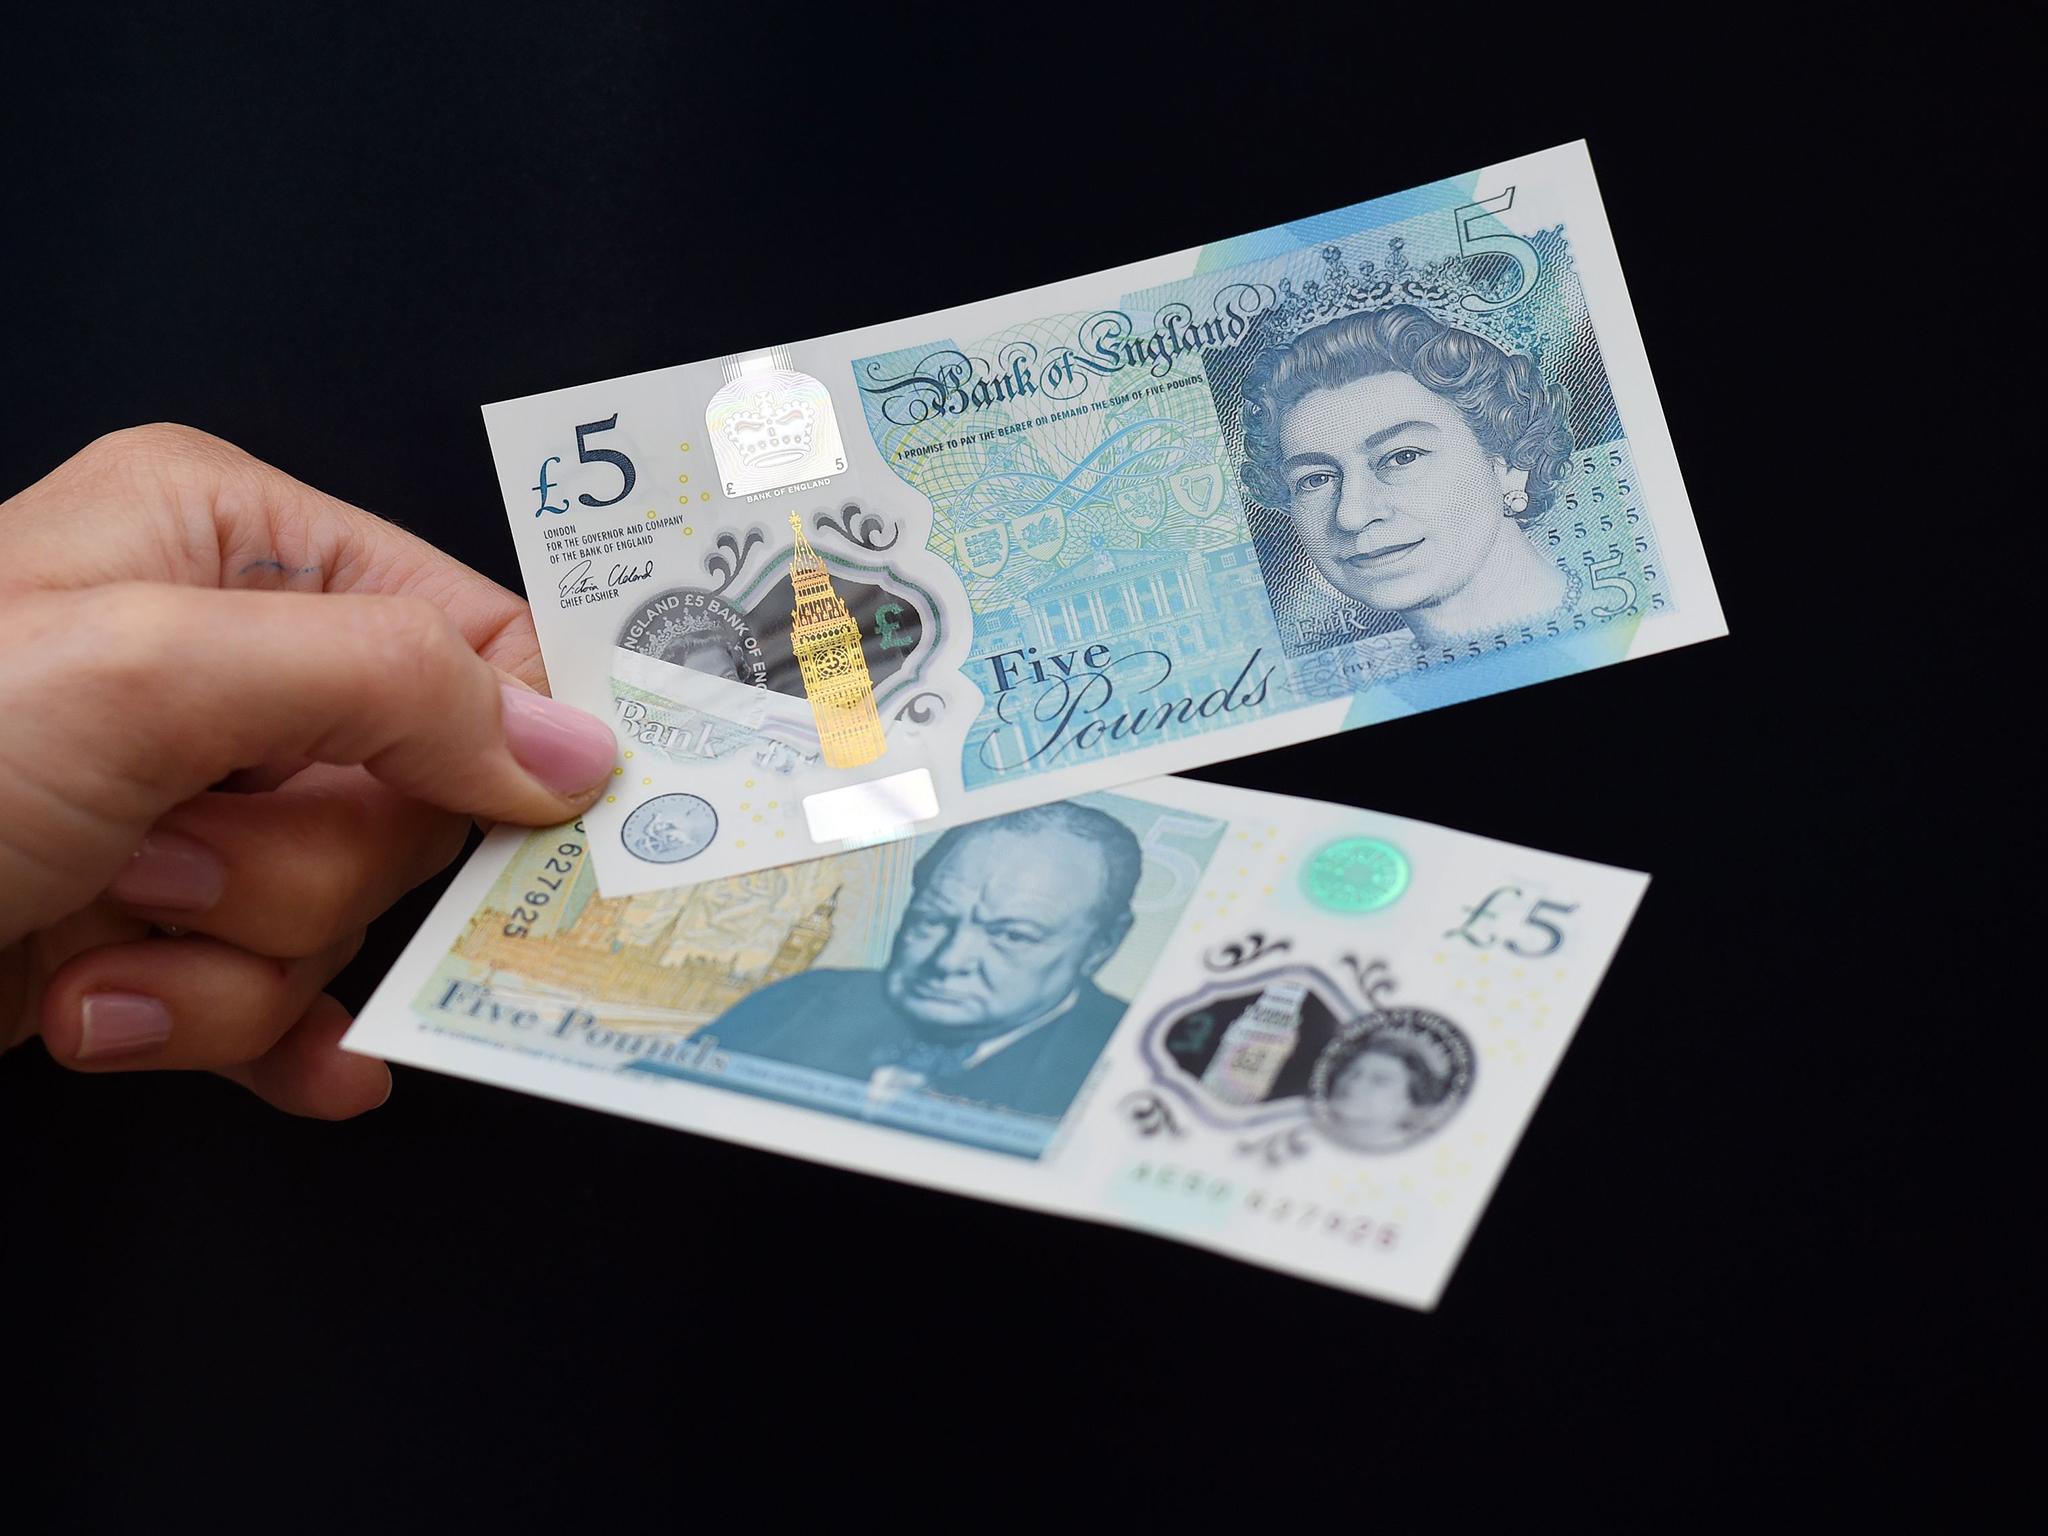 The new plastic £5 note